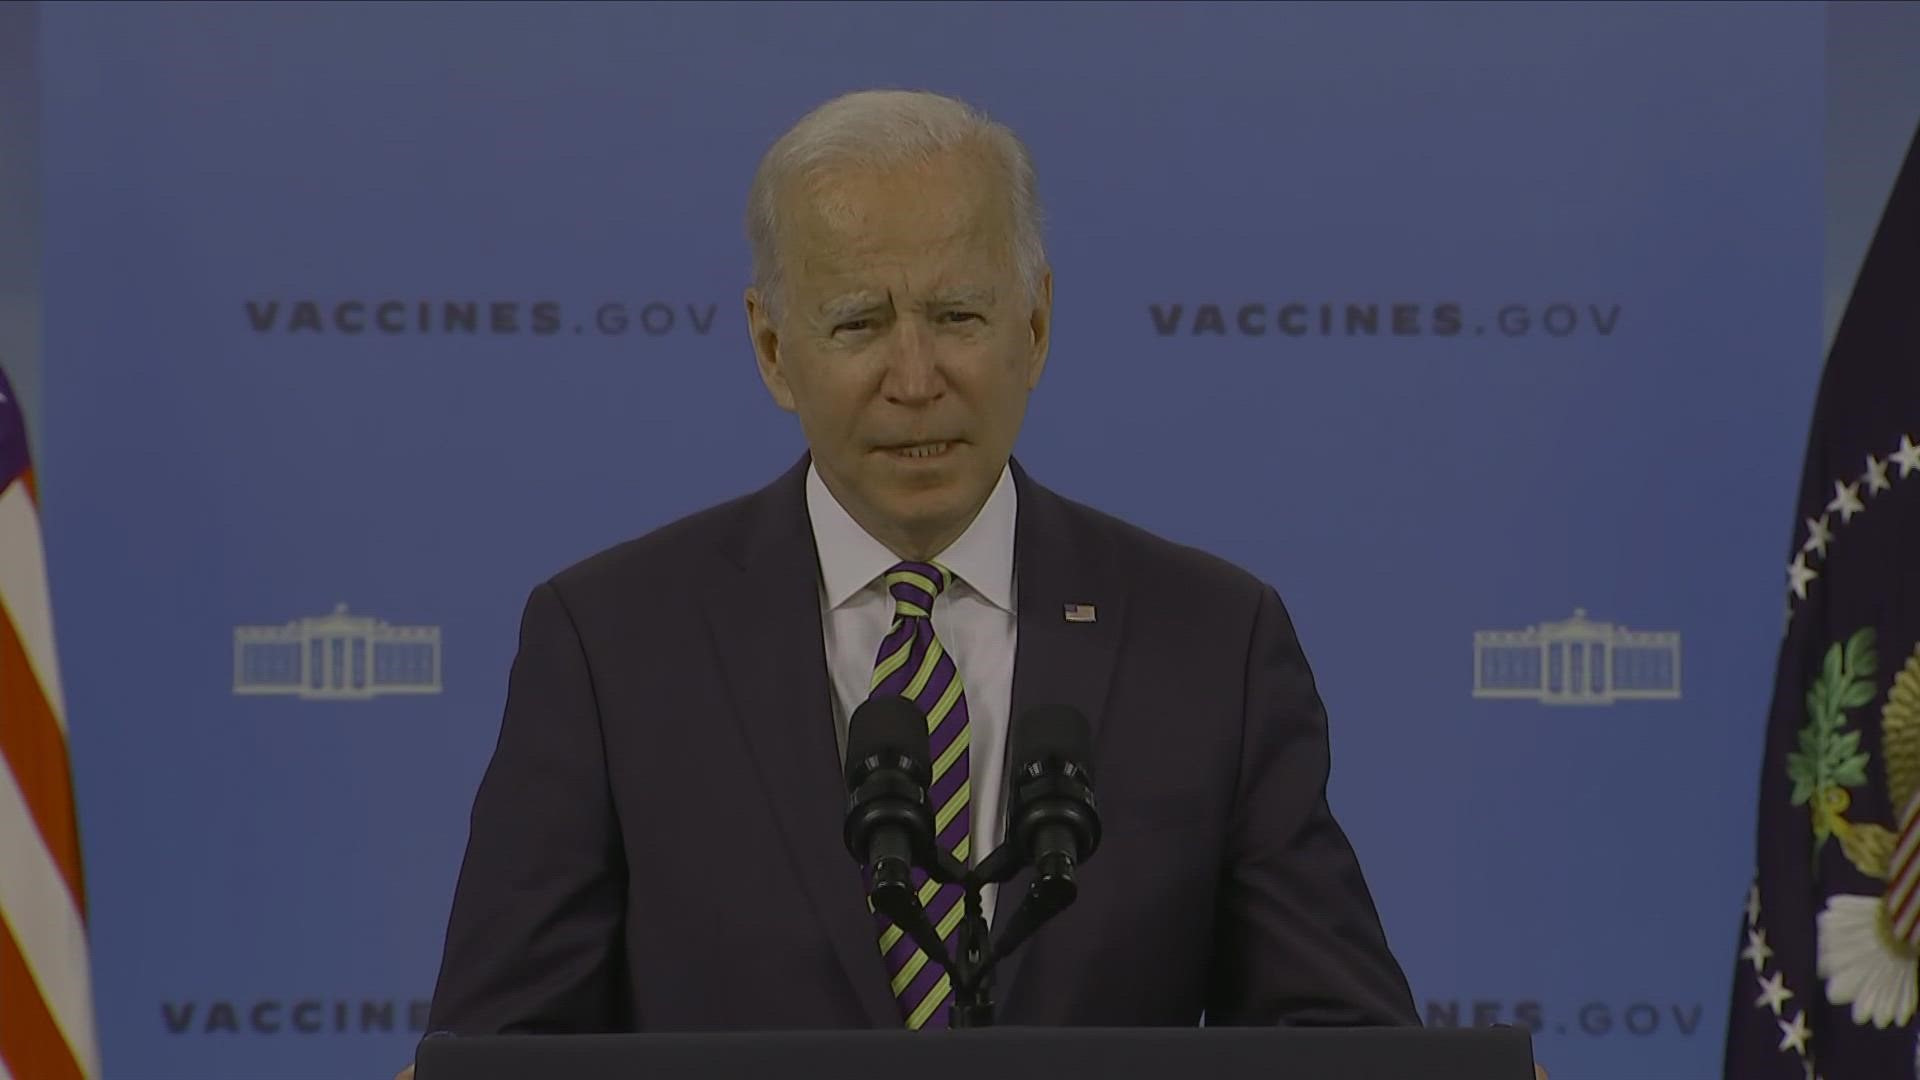 Talking about his vaccination plan Thursday, president Joe Biden said simply, "It's working."